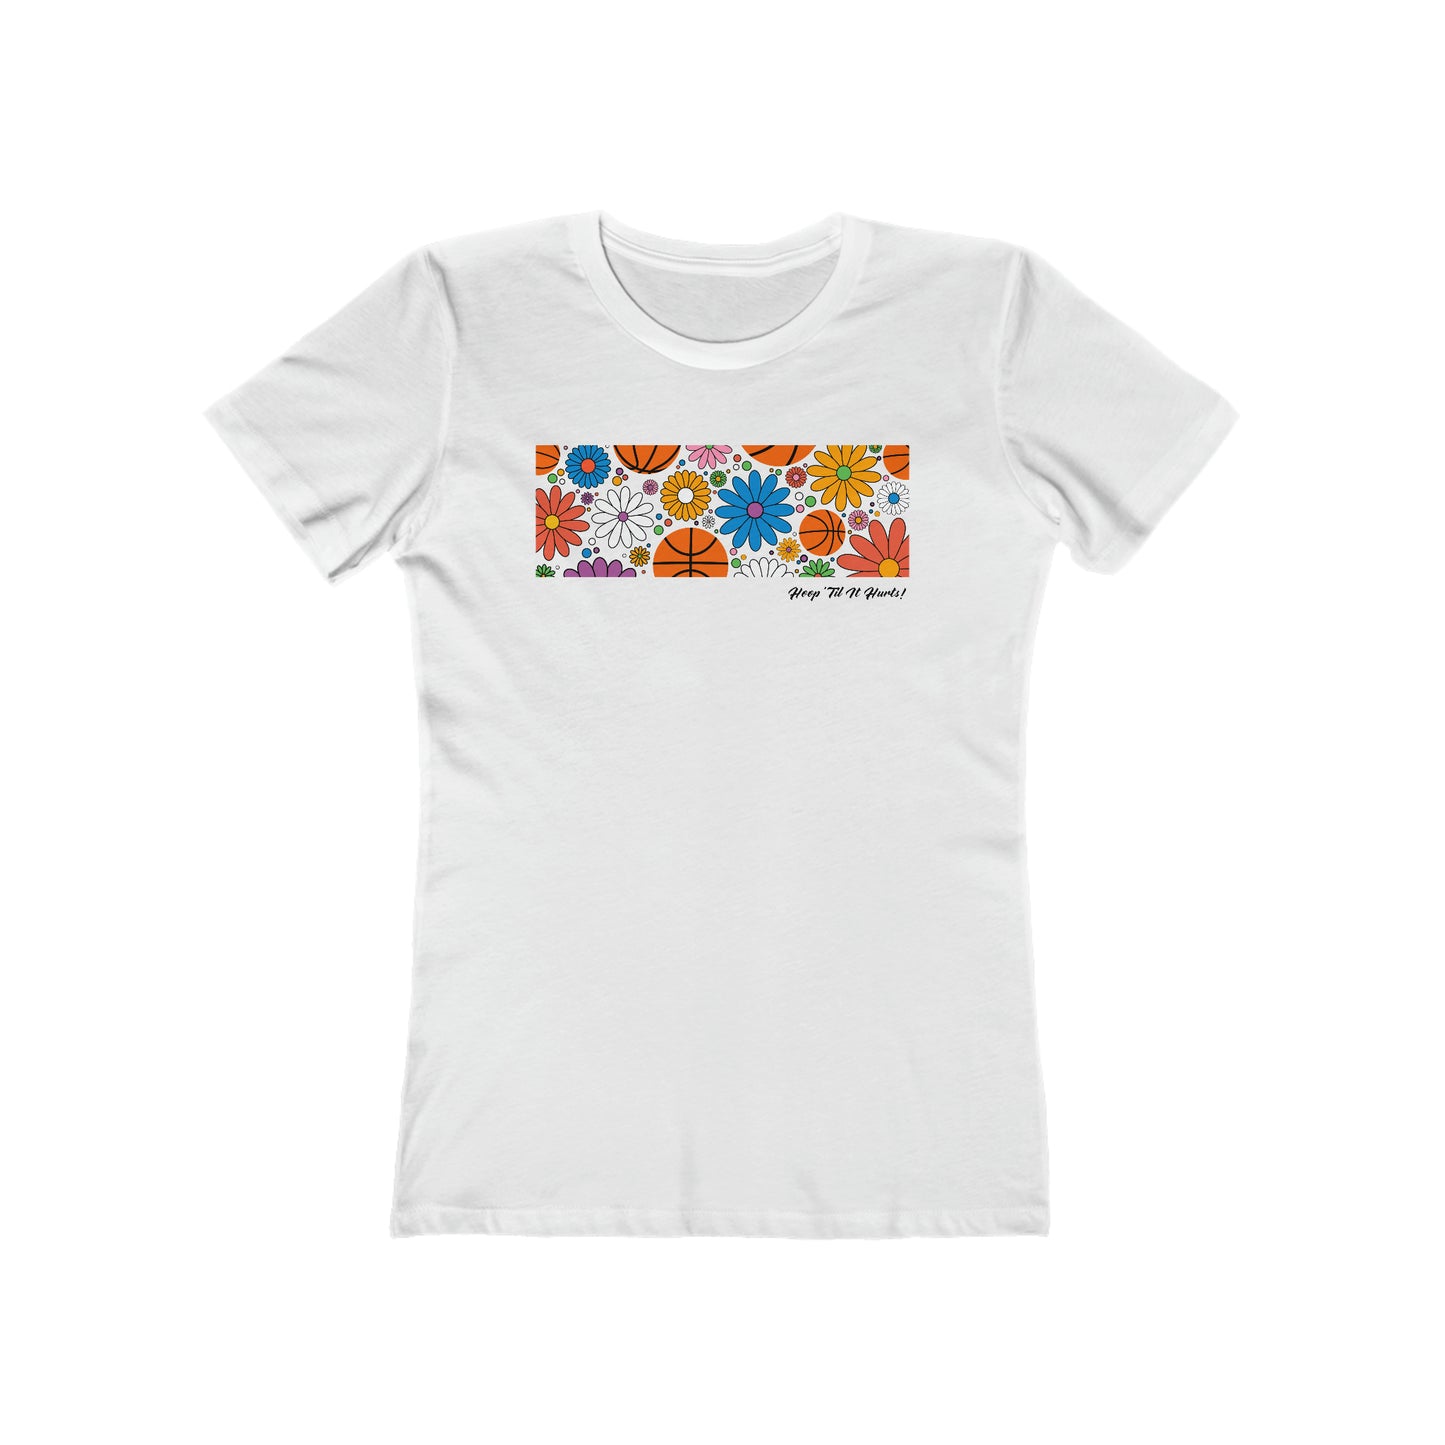 Women's Hippie Flowers and Basketballs T-Shirt - Adult Sizes Available in 4 Colors